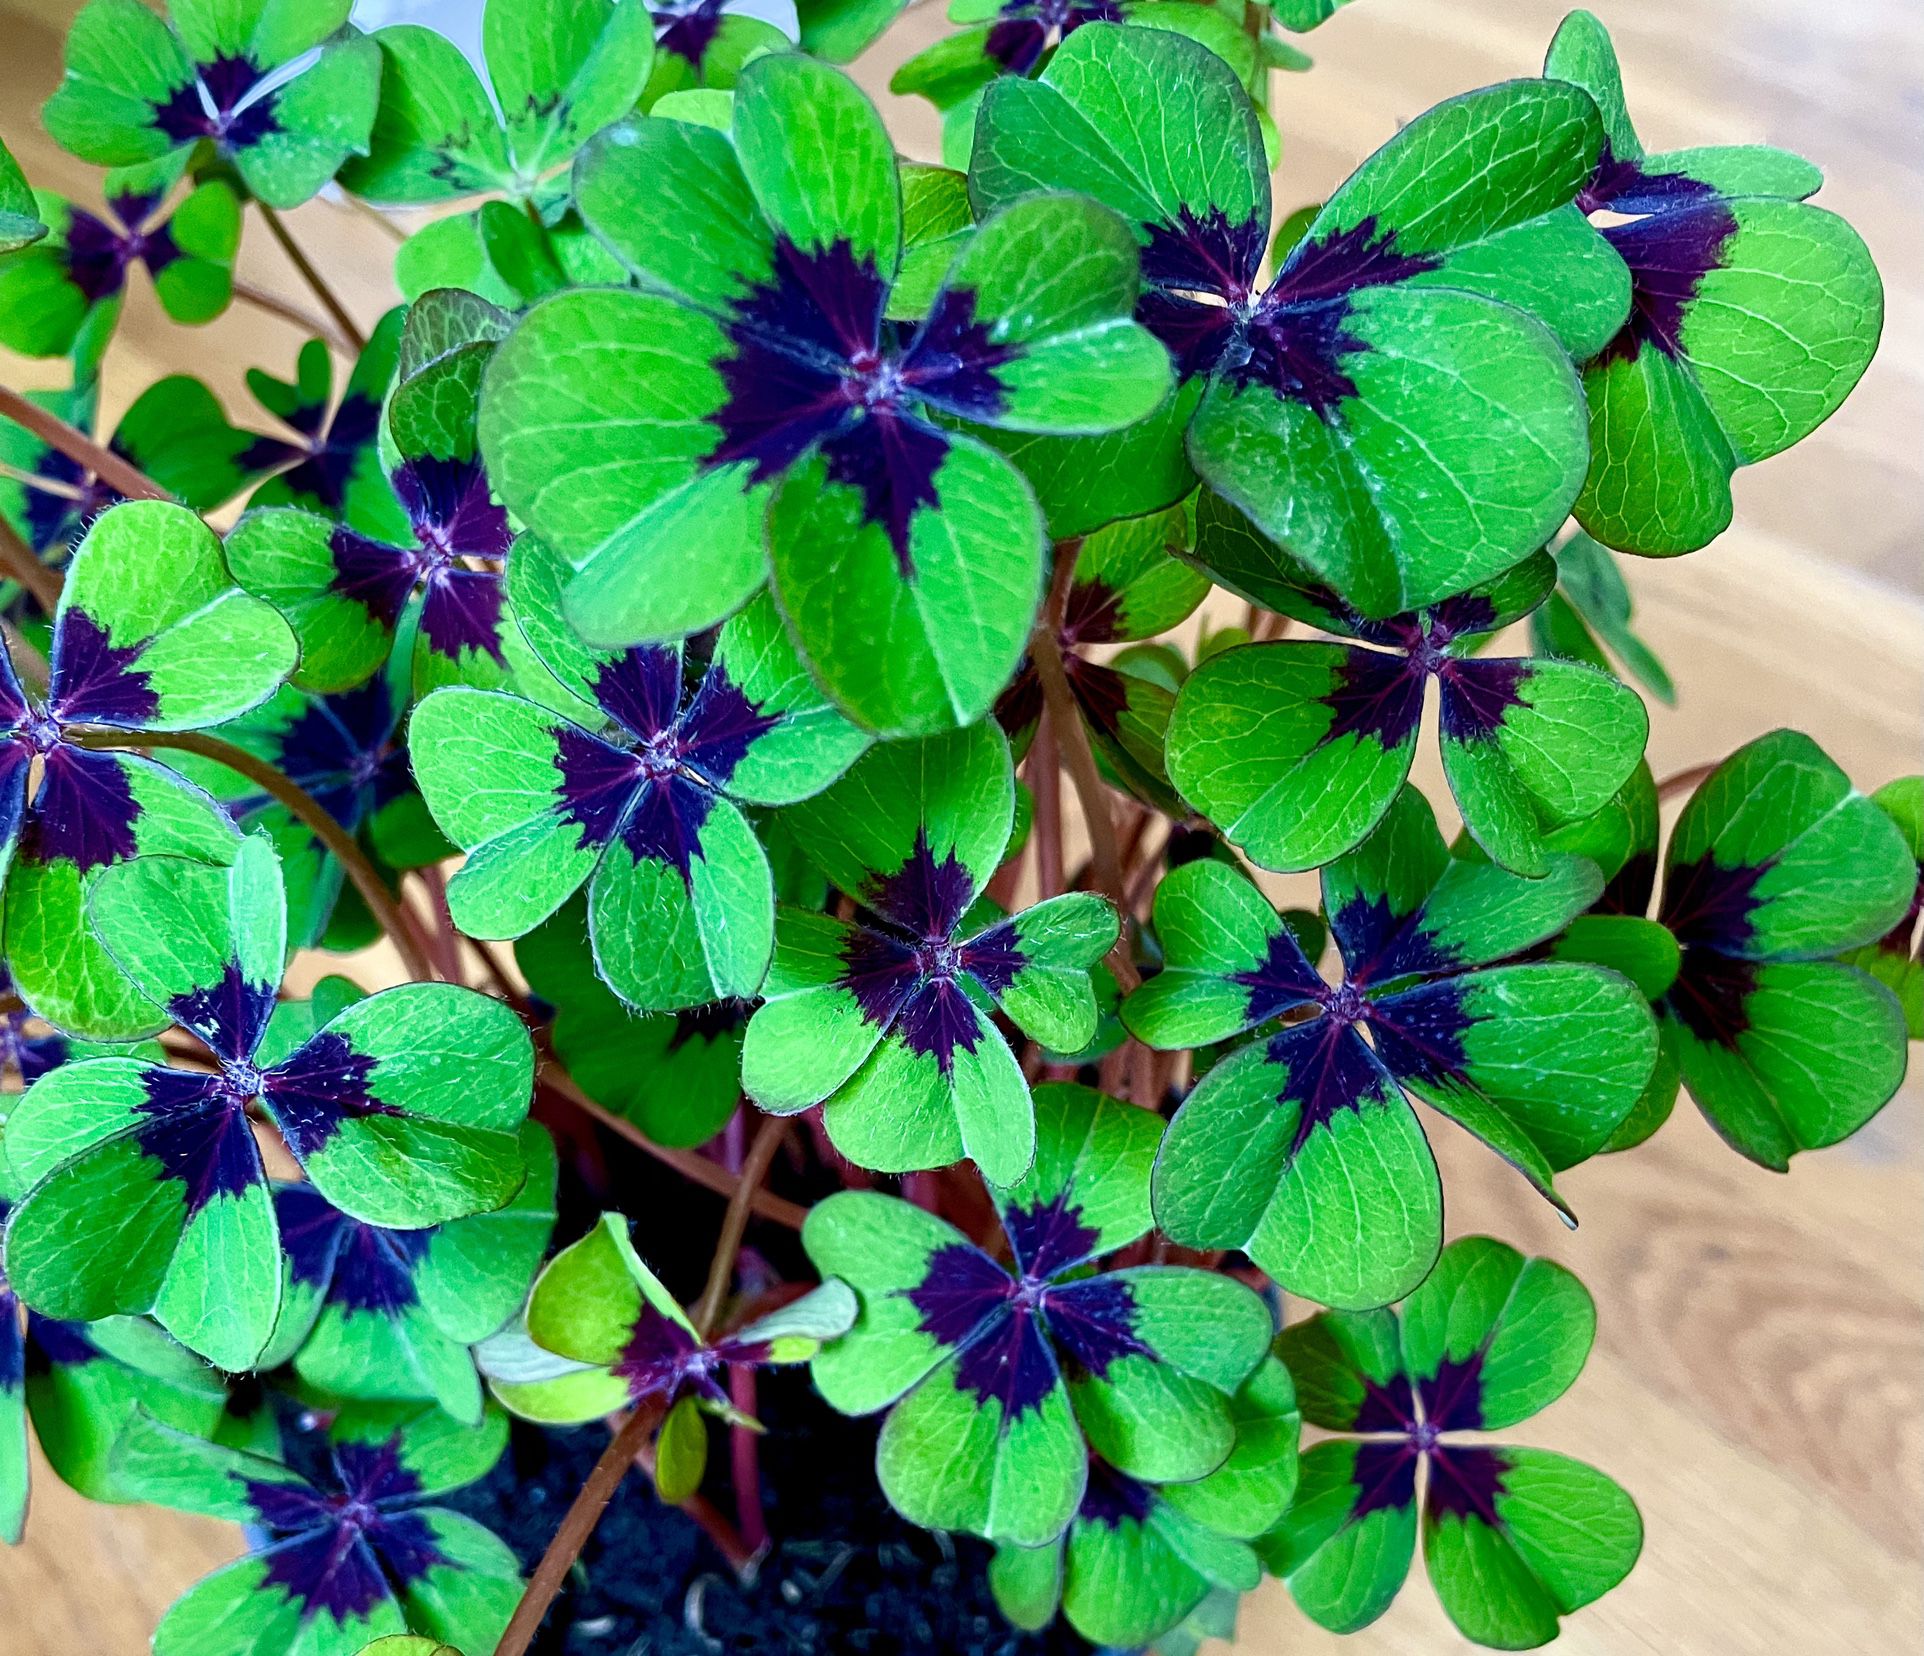 Oxalis Iron Cross / Good Luck 🍀 Plant in 6in. Pot / Free Delivery Available 